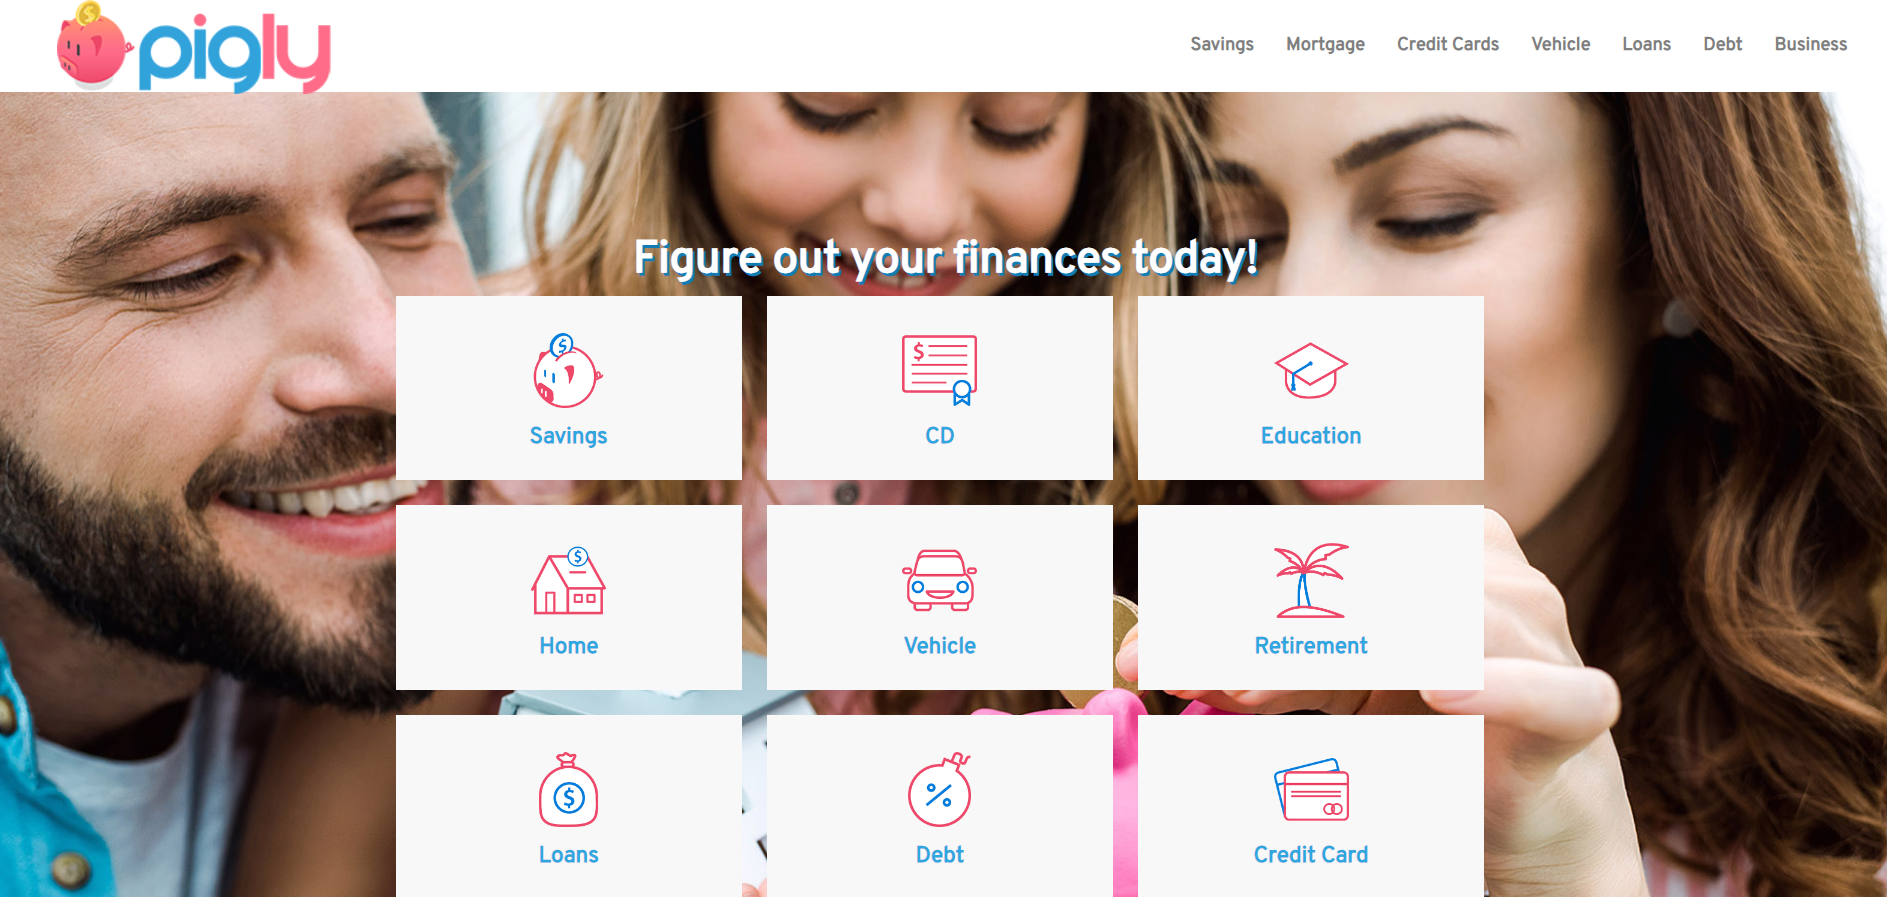 Pigly! – One Stop Shop for All Your Financial Needs